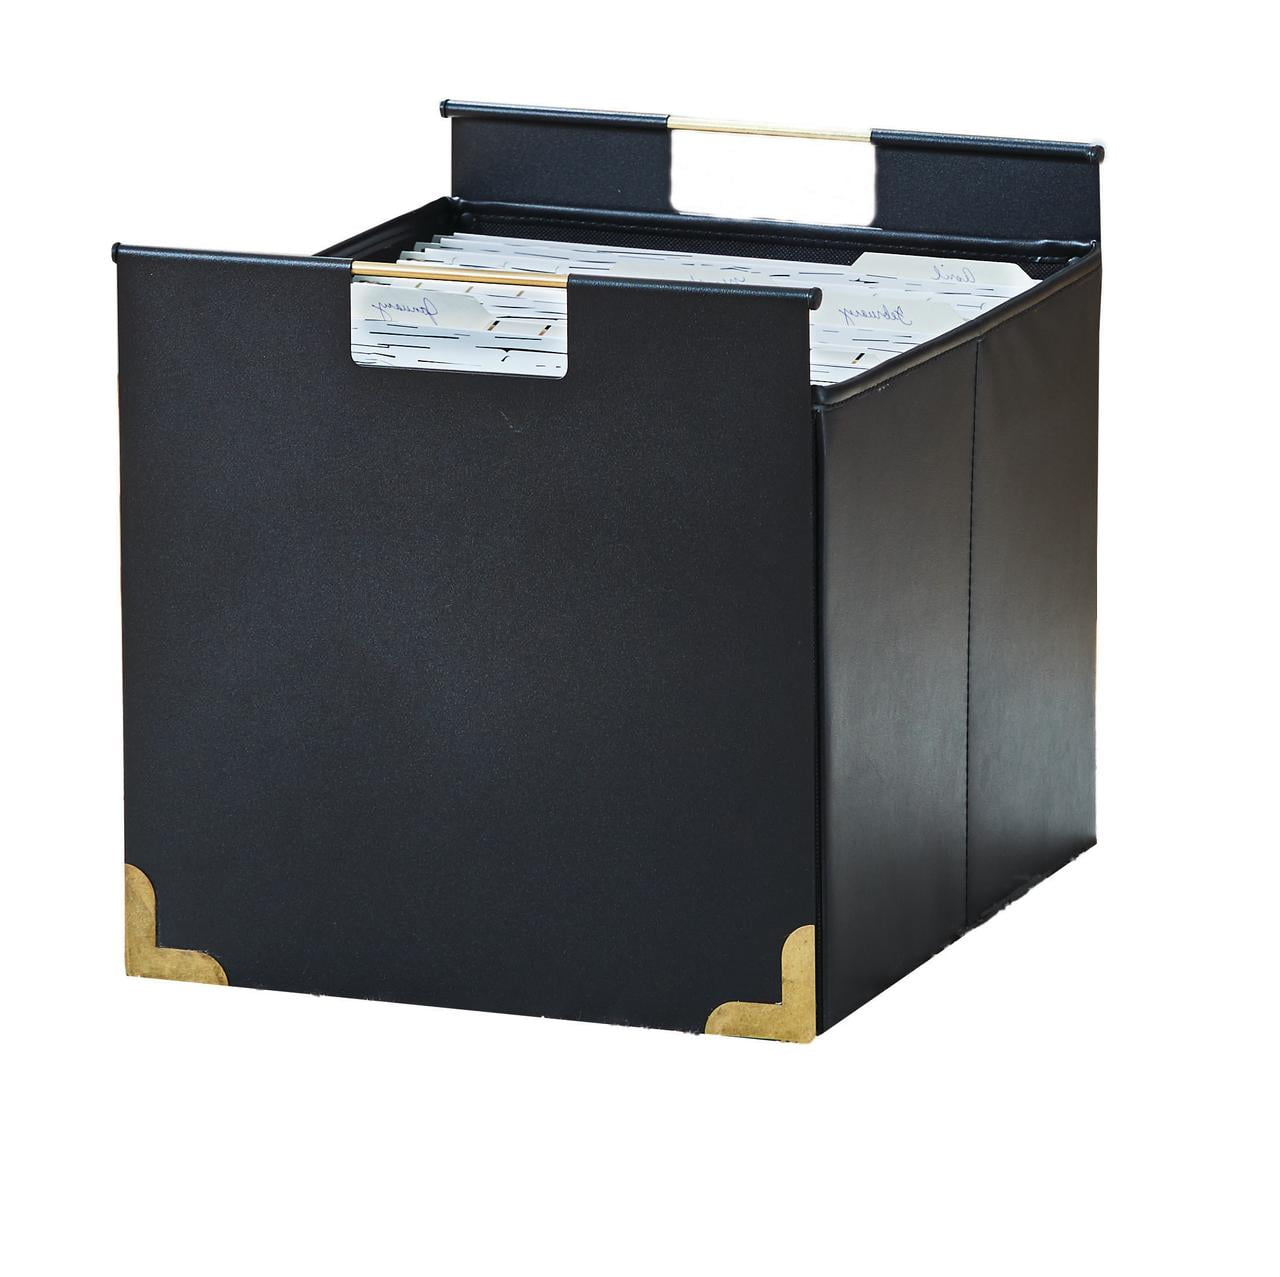 Better Homes & Gardens Metal file Cube Storage Bin(12.75" x 12.75") - Black 1 Piece for Adult